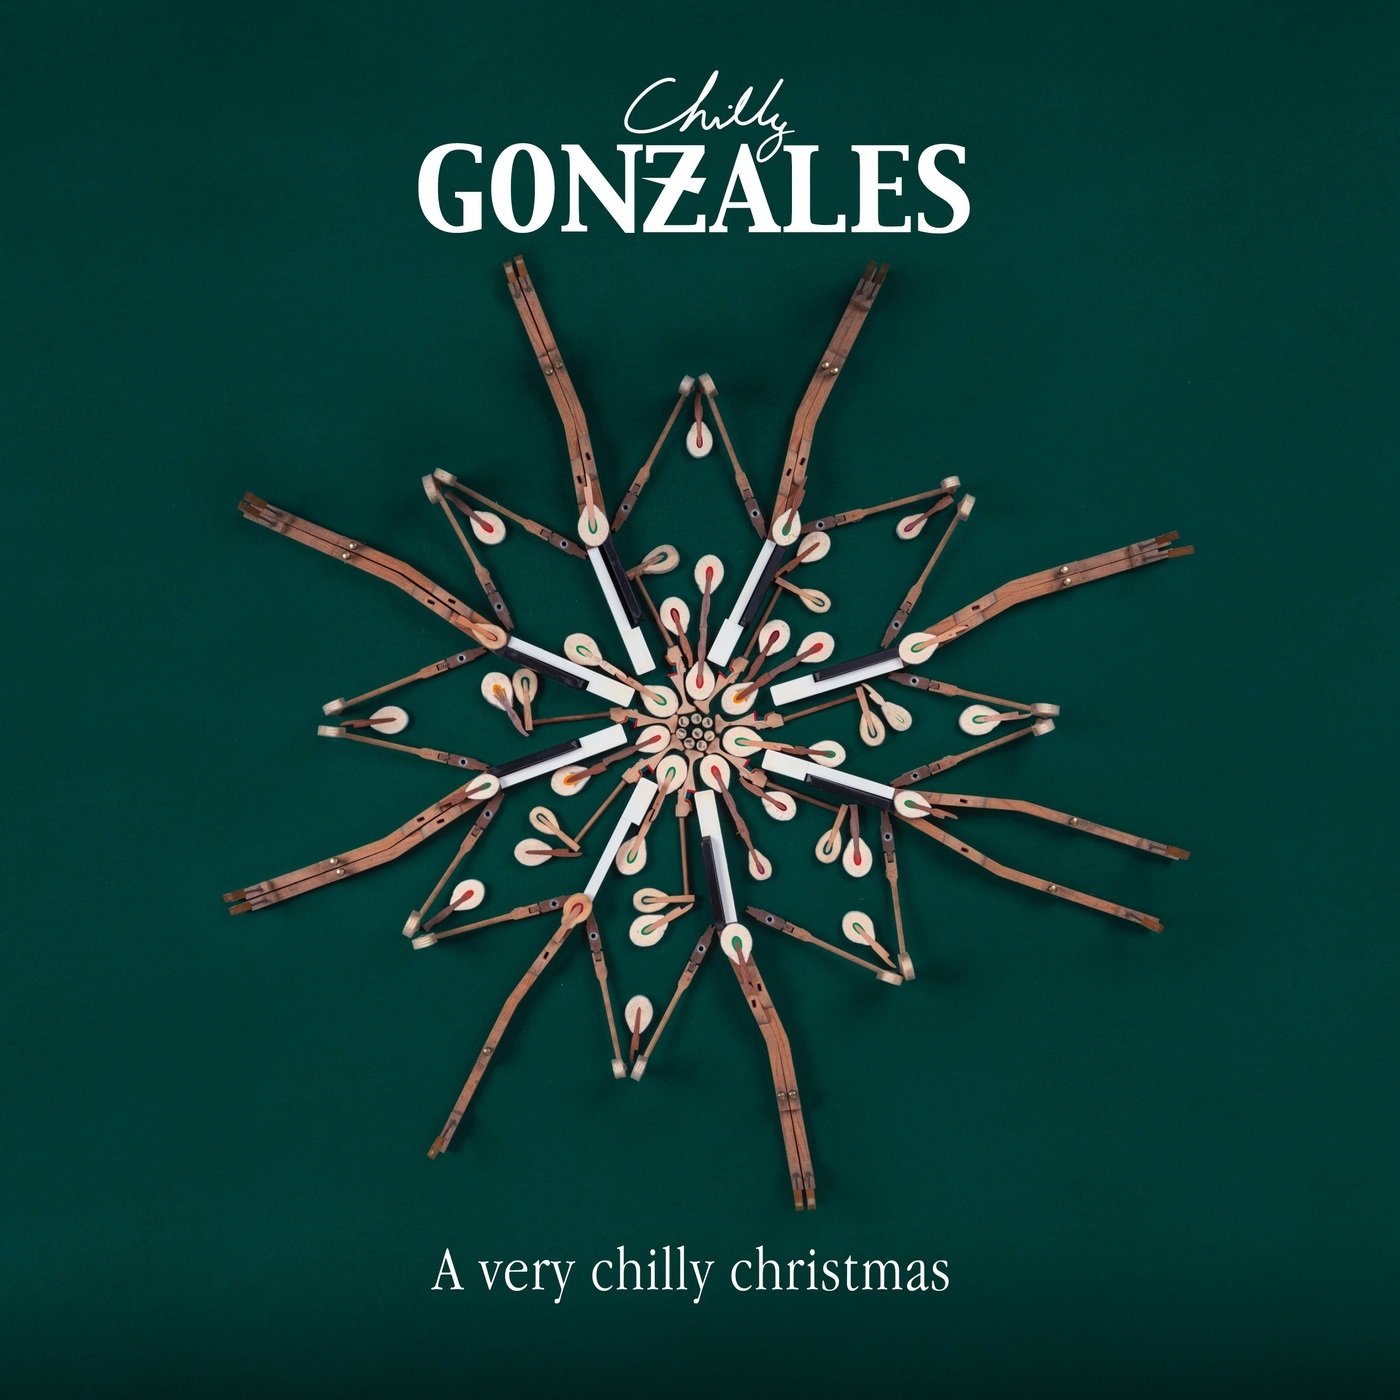 Chilly Gonzales - A Very Chilly Christmas (2020) [FLAC 24bit/48kHz]